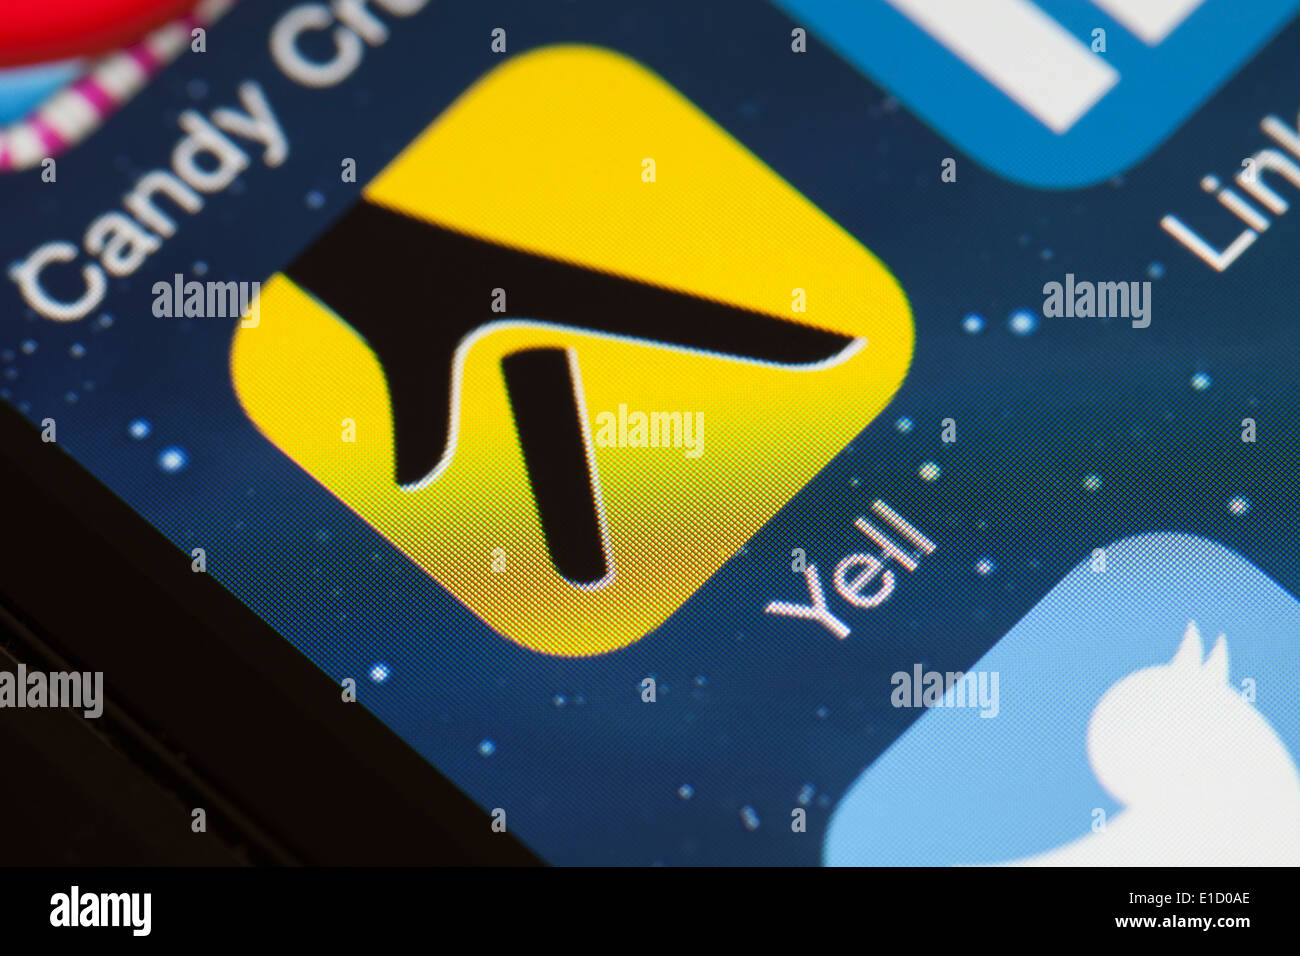 yell app icon on mobile phone. Stock Photo